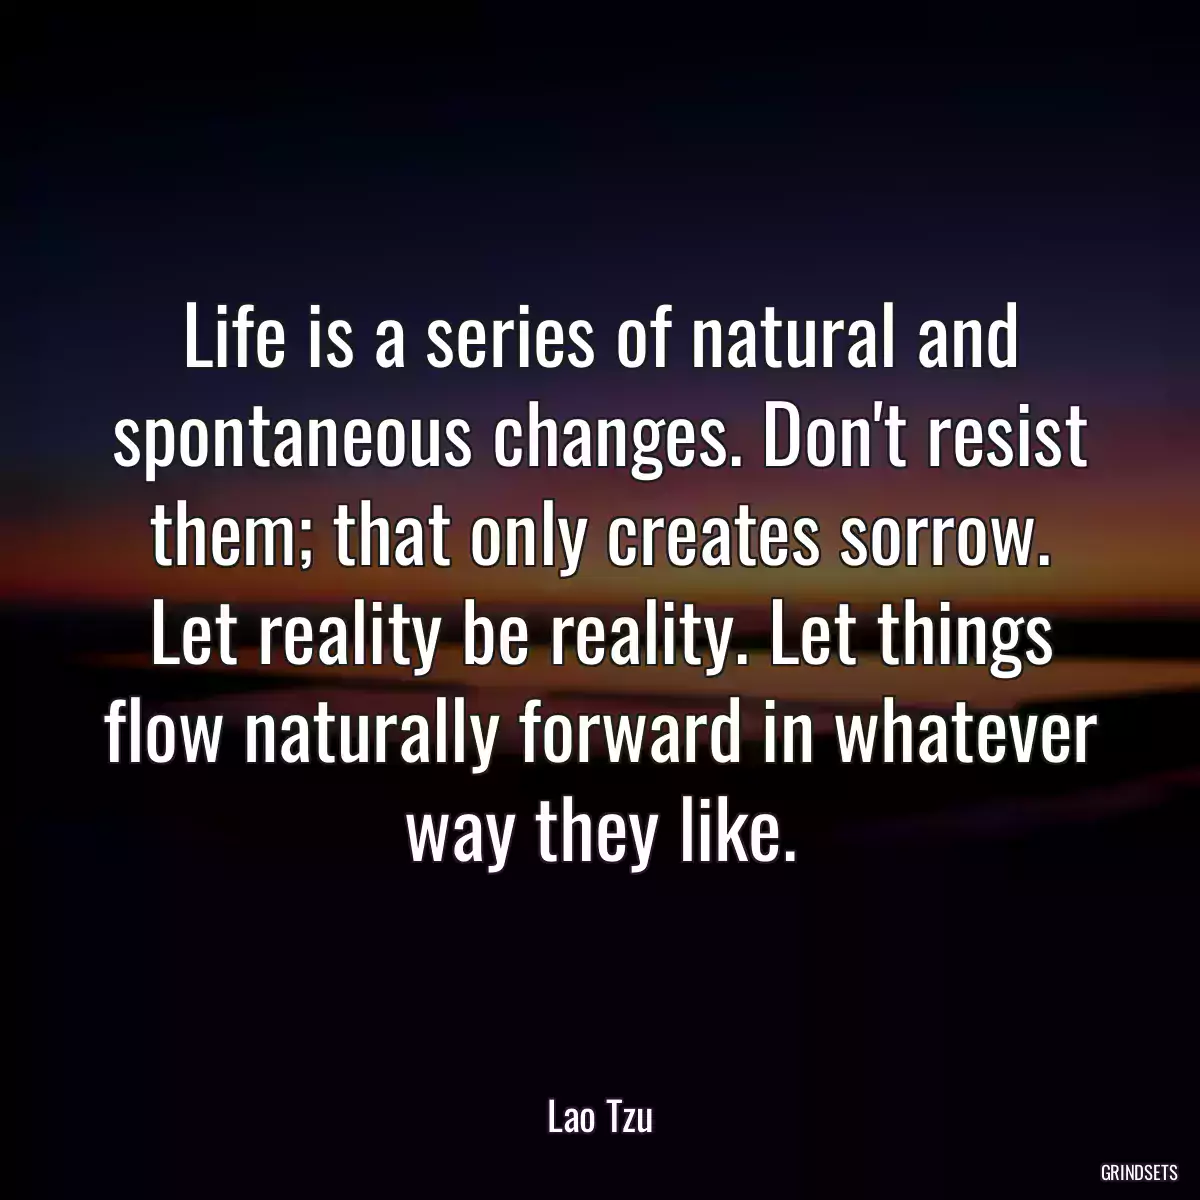 Life is a series of natural and spontaneous changes. Don\'t resist them; that only creates sorrow. Let reality be reality. Let things flow naturally forward in whatever way they like.